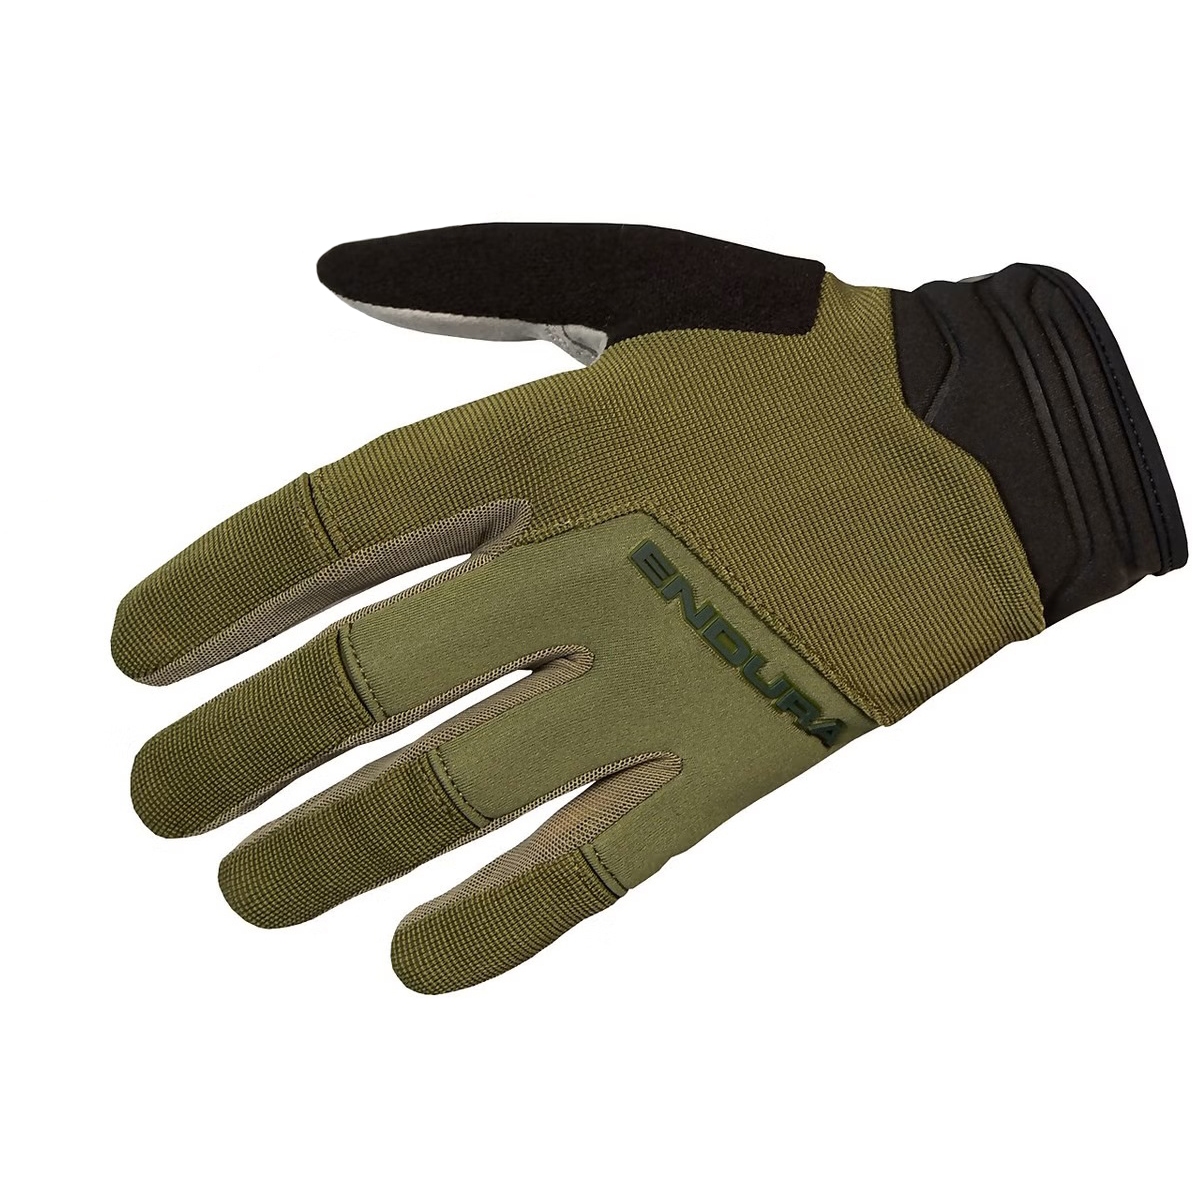 Picture of Endura Hummvee Plus II Gloves - olive green